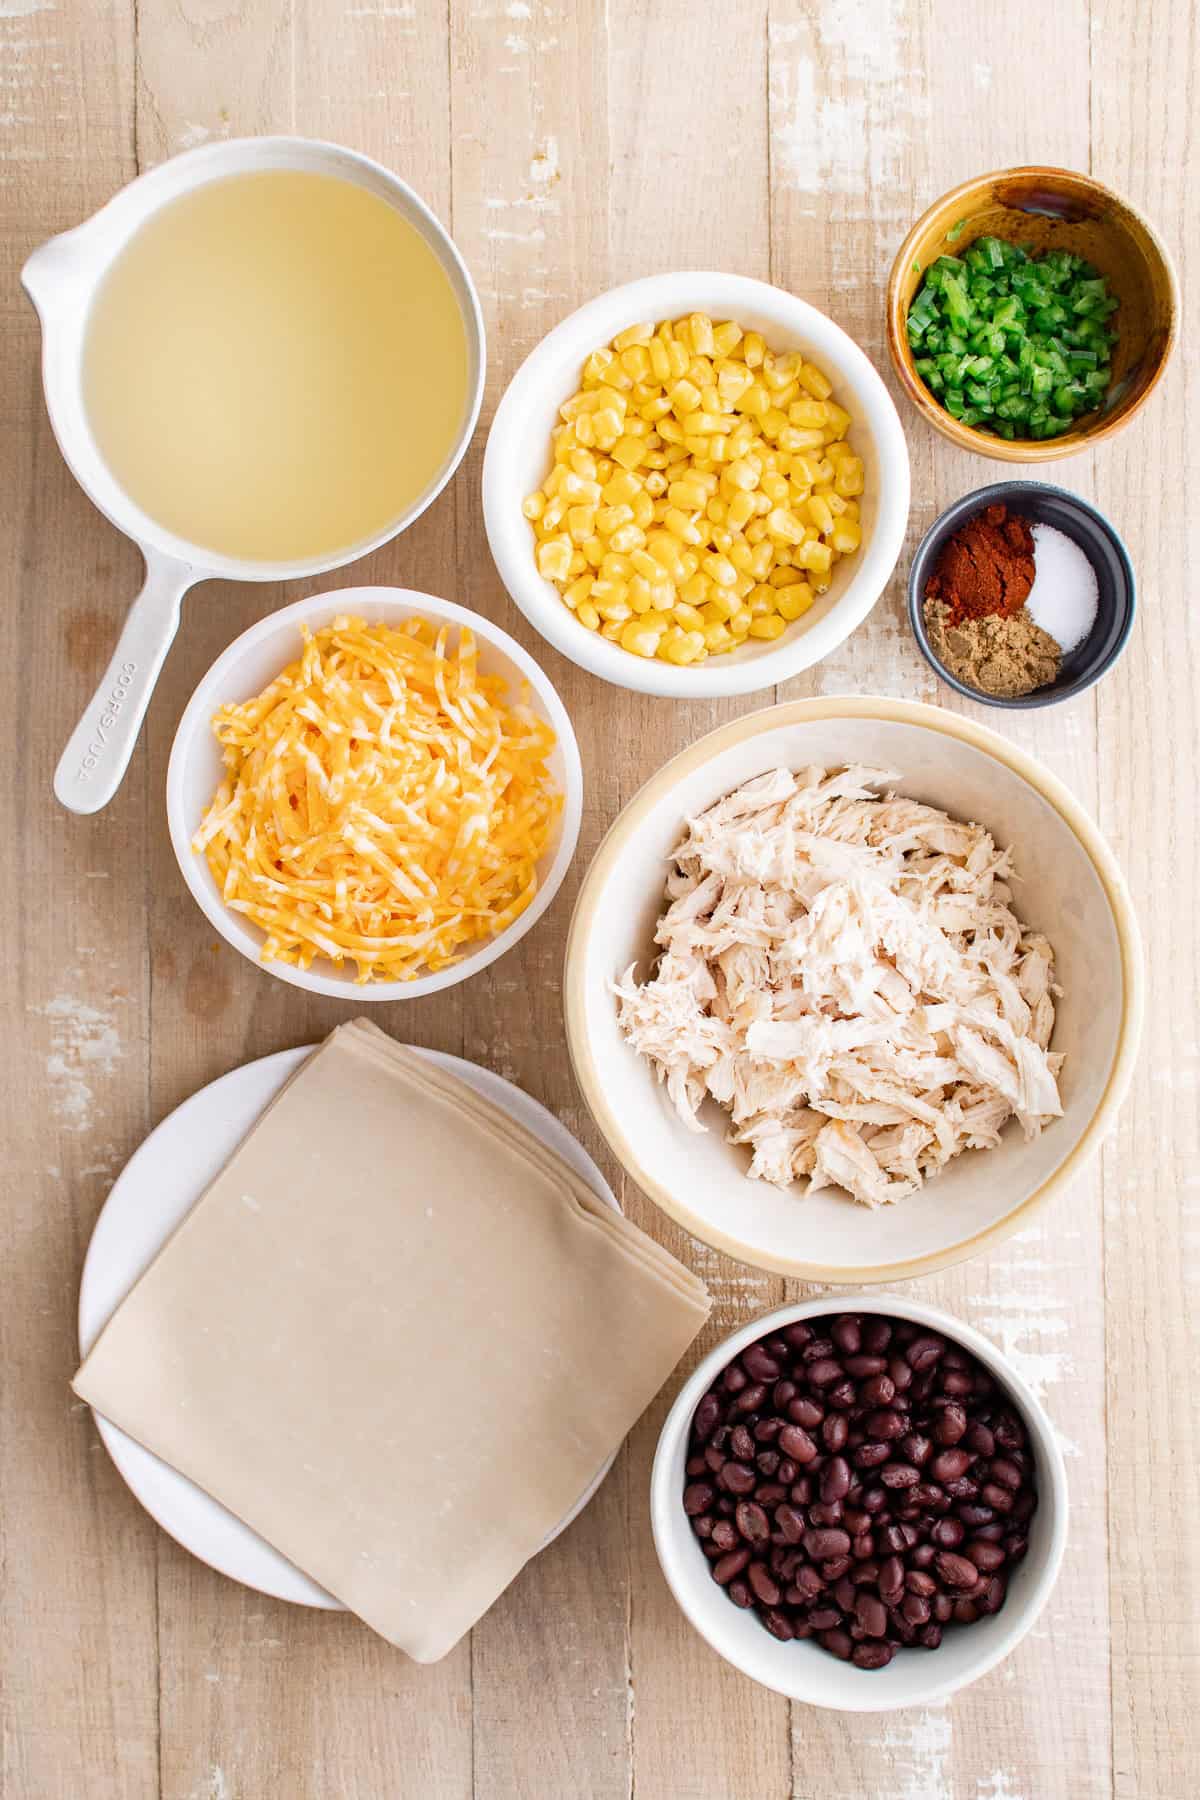 Vegetable oil in a measuring cup, shredded chicken, shredded colby jack cheese, black beans, thawed corn, finely minced jalapeño, ground cumin, chili powder, salt, and egg roll wrappers arranged on a wooden surface.